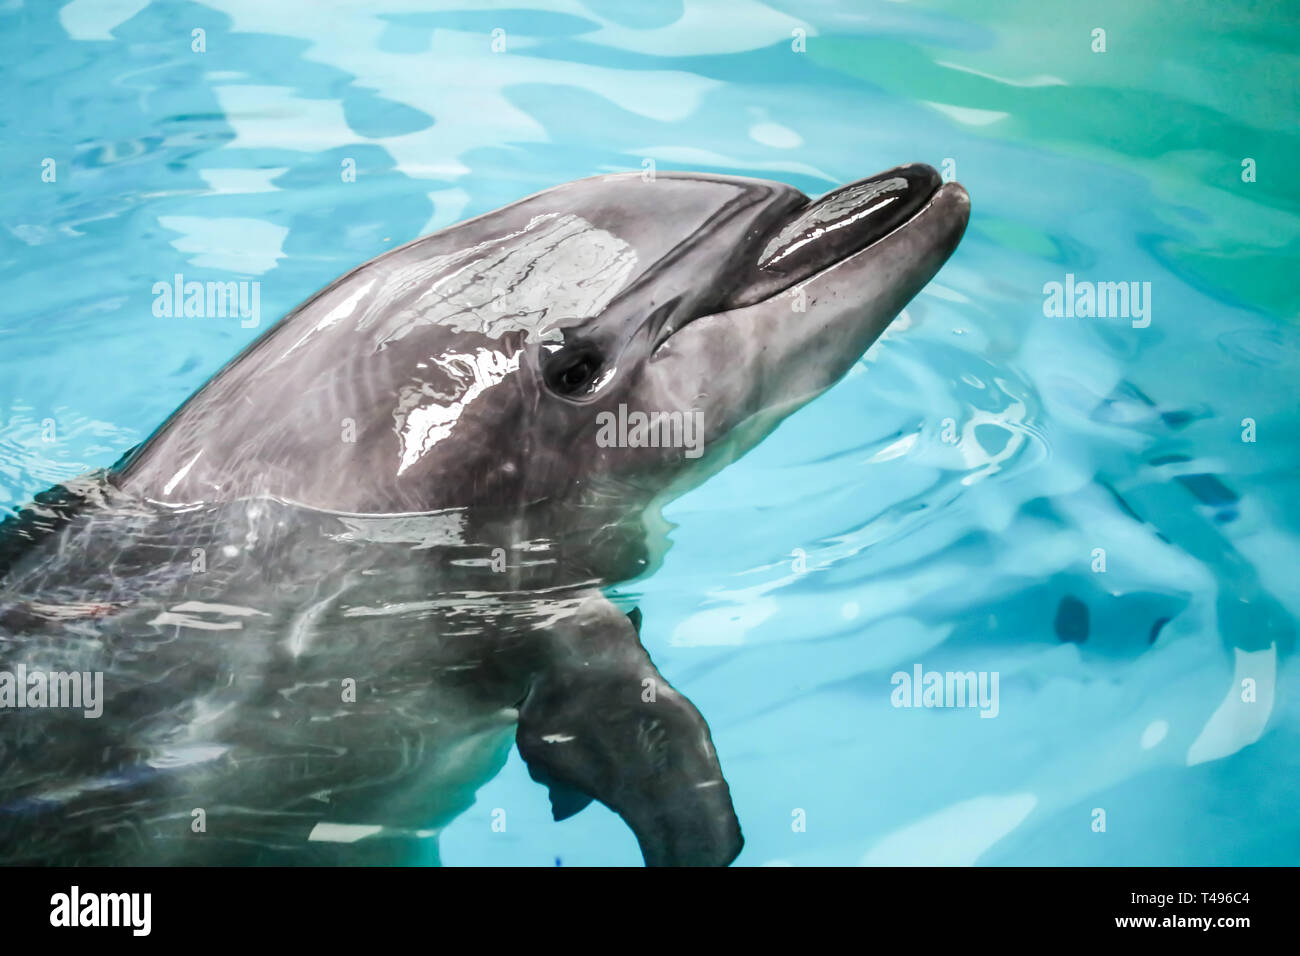 Very cute Dolphin, they are very intelligent and kind animals. Stock Photo